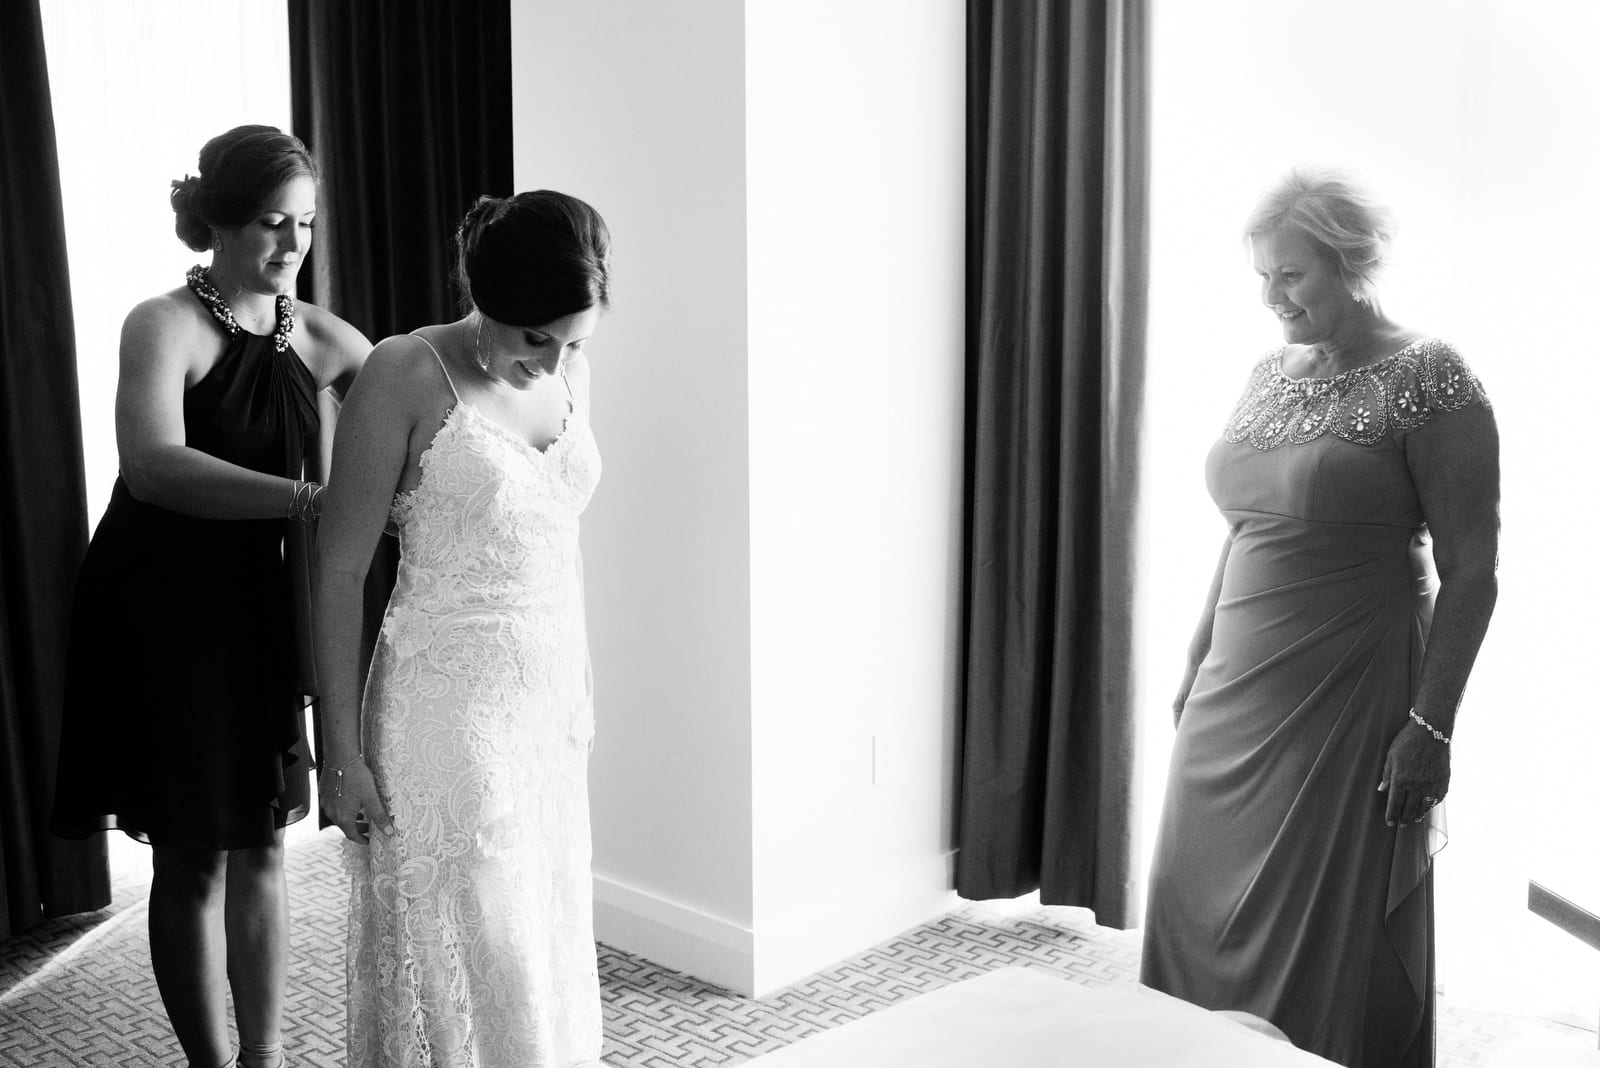 A bride looks down as her sister buttons her dress and their mother looks on before Wedding Photography at Fairmont Hotel Pittsburgh.